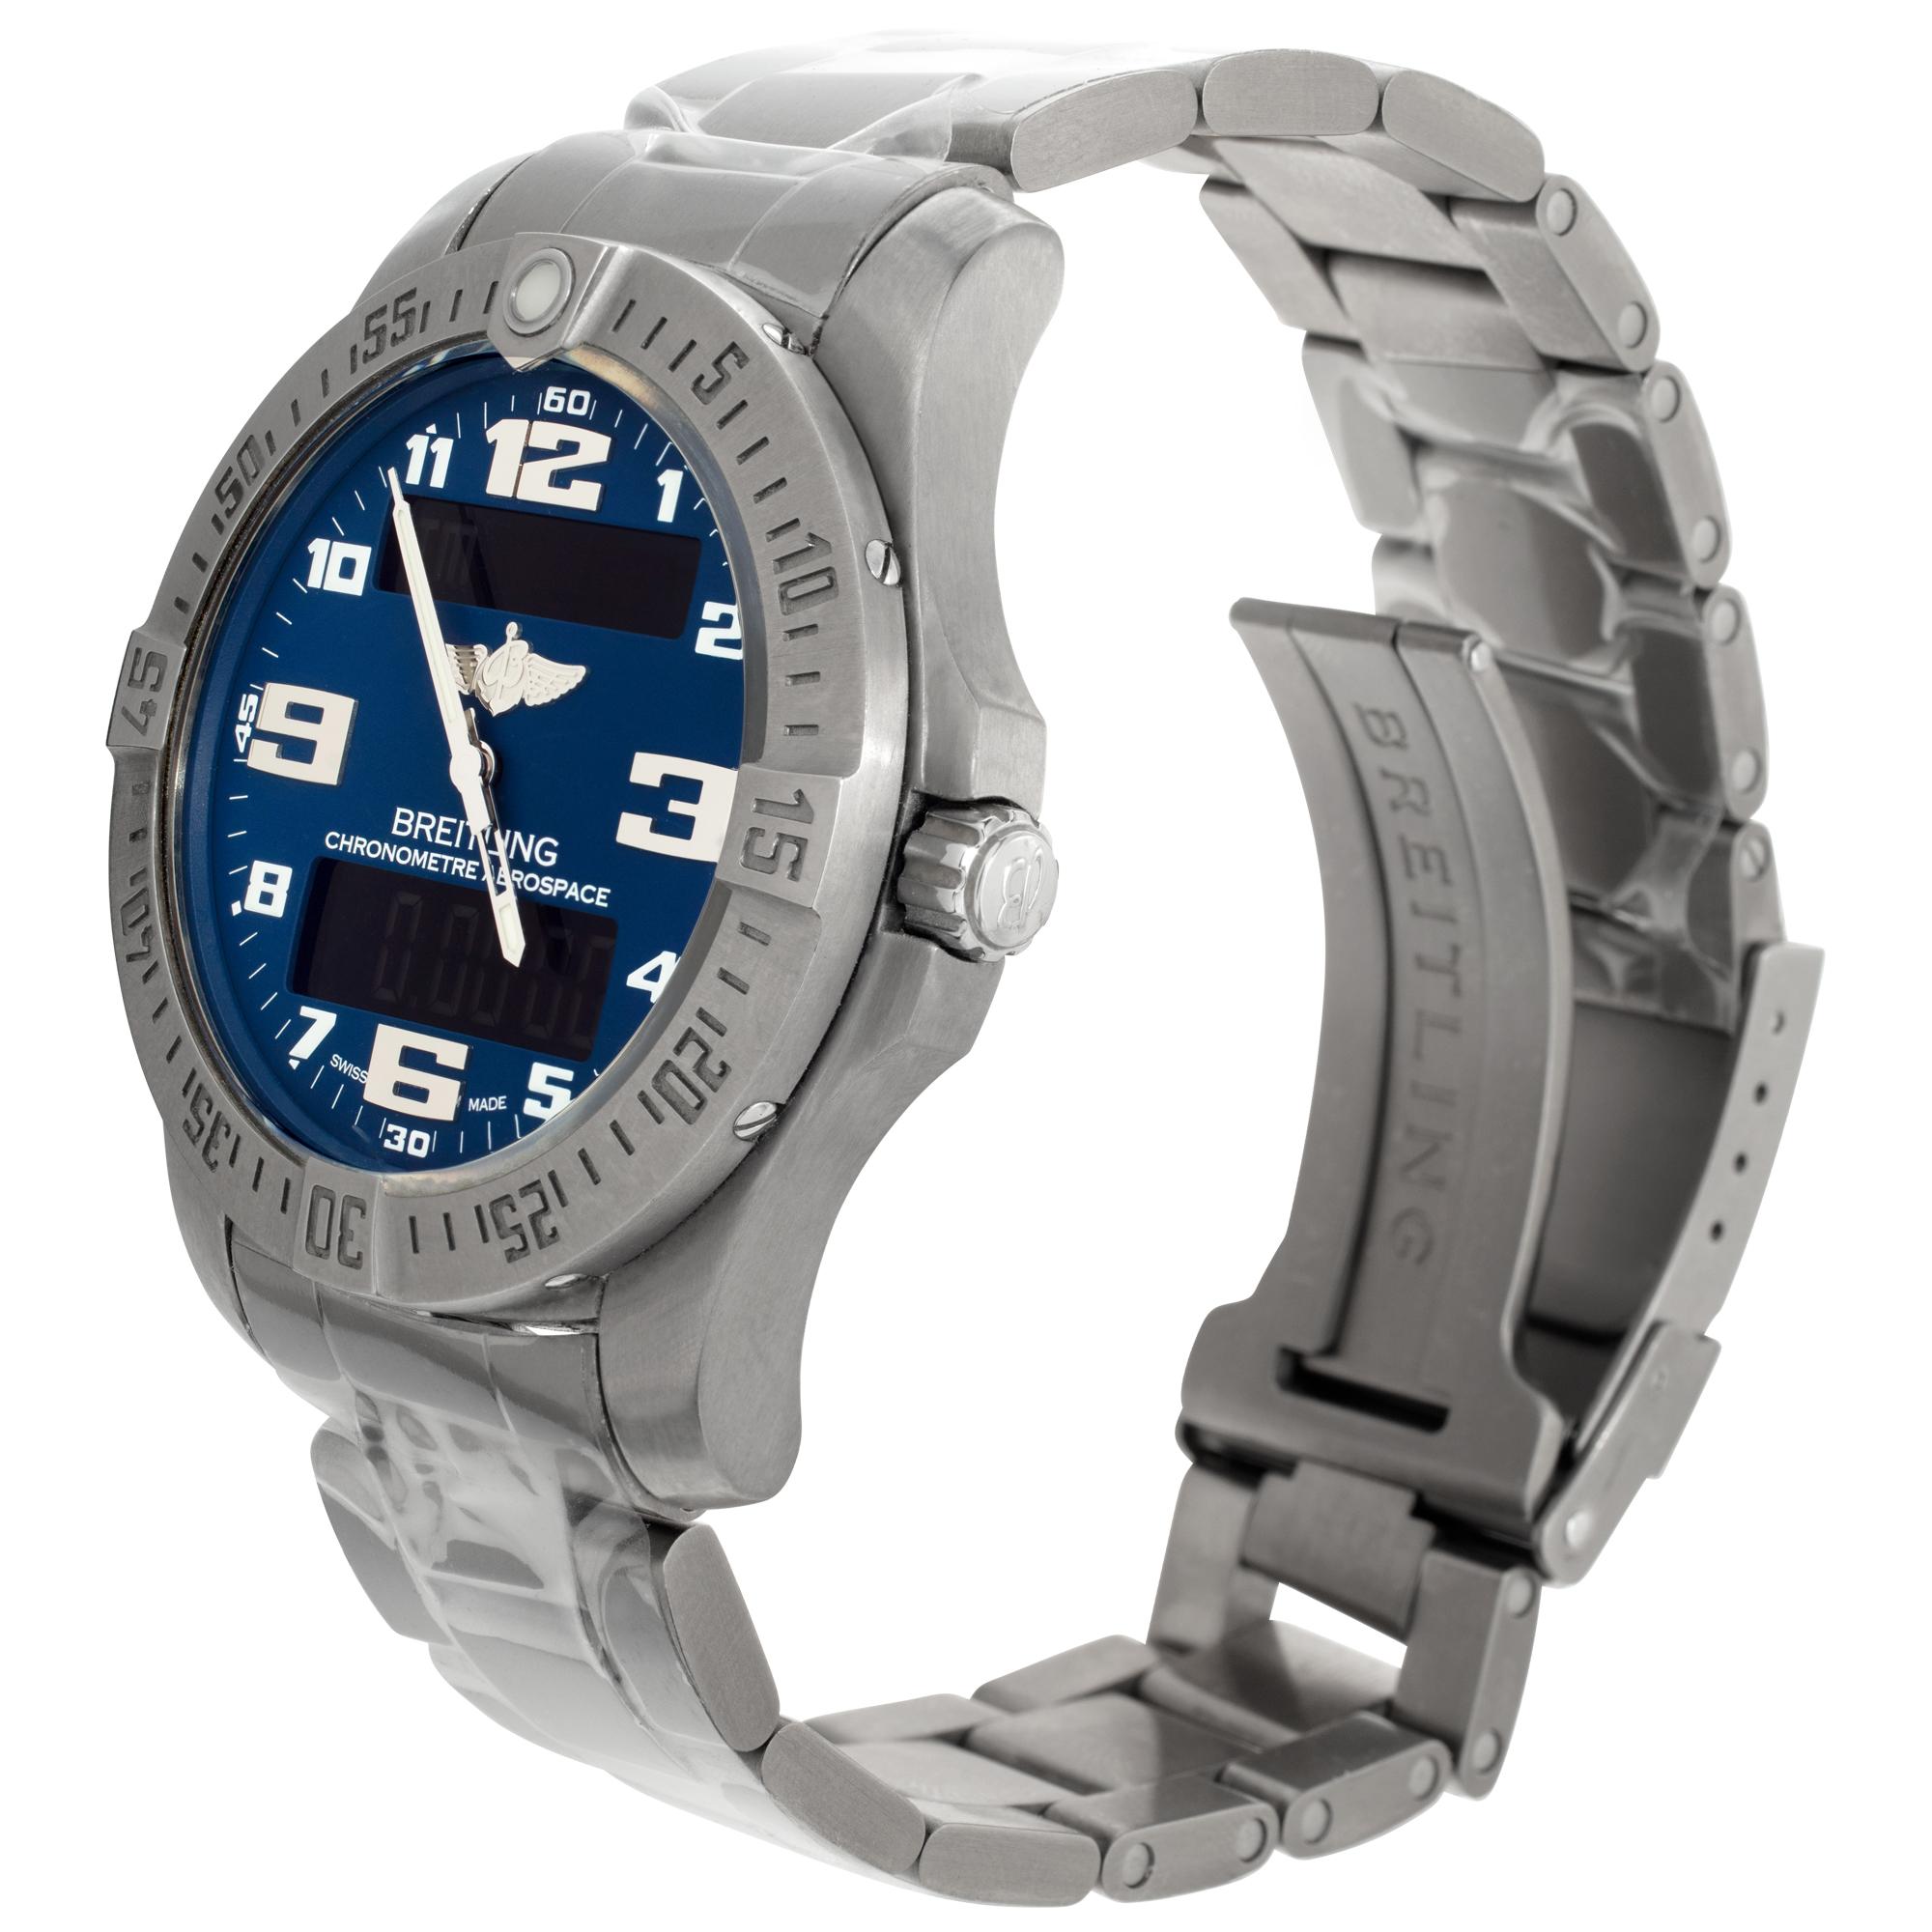 Breitling Aerospace in titanium. Quartz w/ multi function digital displays. 42 mm case size. With box. Ref e79363. Fine Pre-owned Breitling Watch. Certified preowned Sport Breitling Aerospace e79363 watch is made out of Titanium on a Titanium